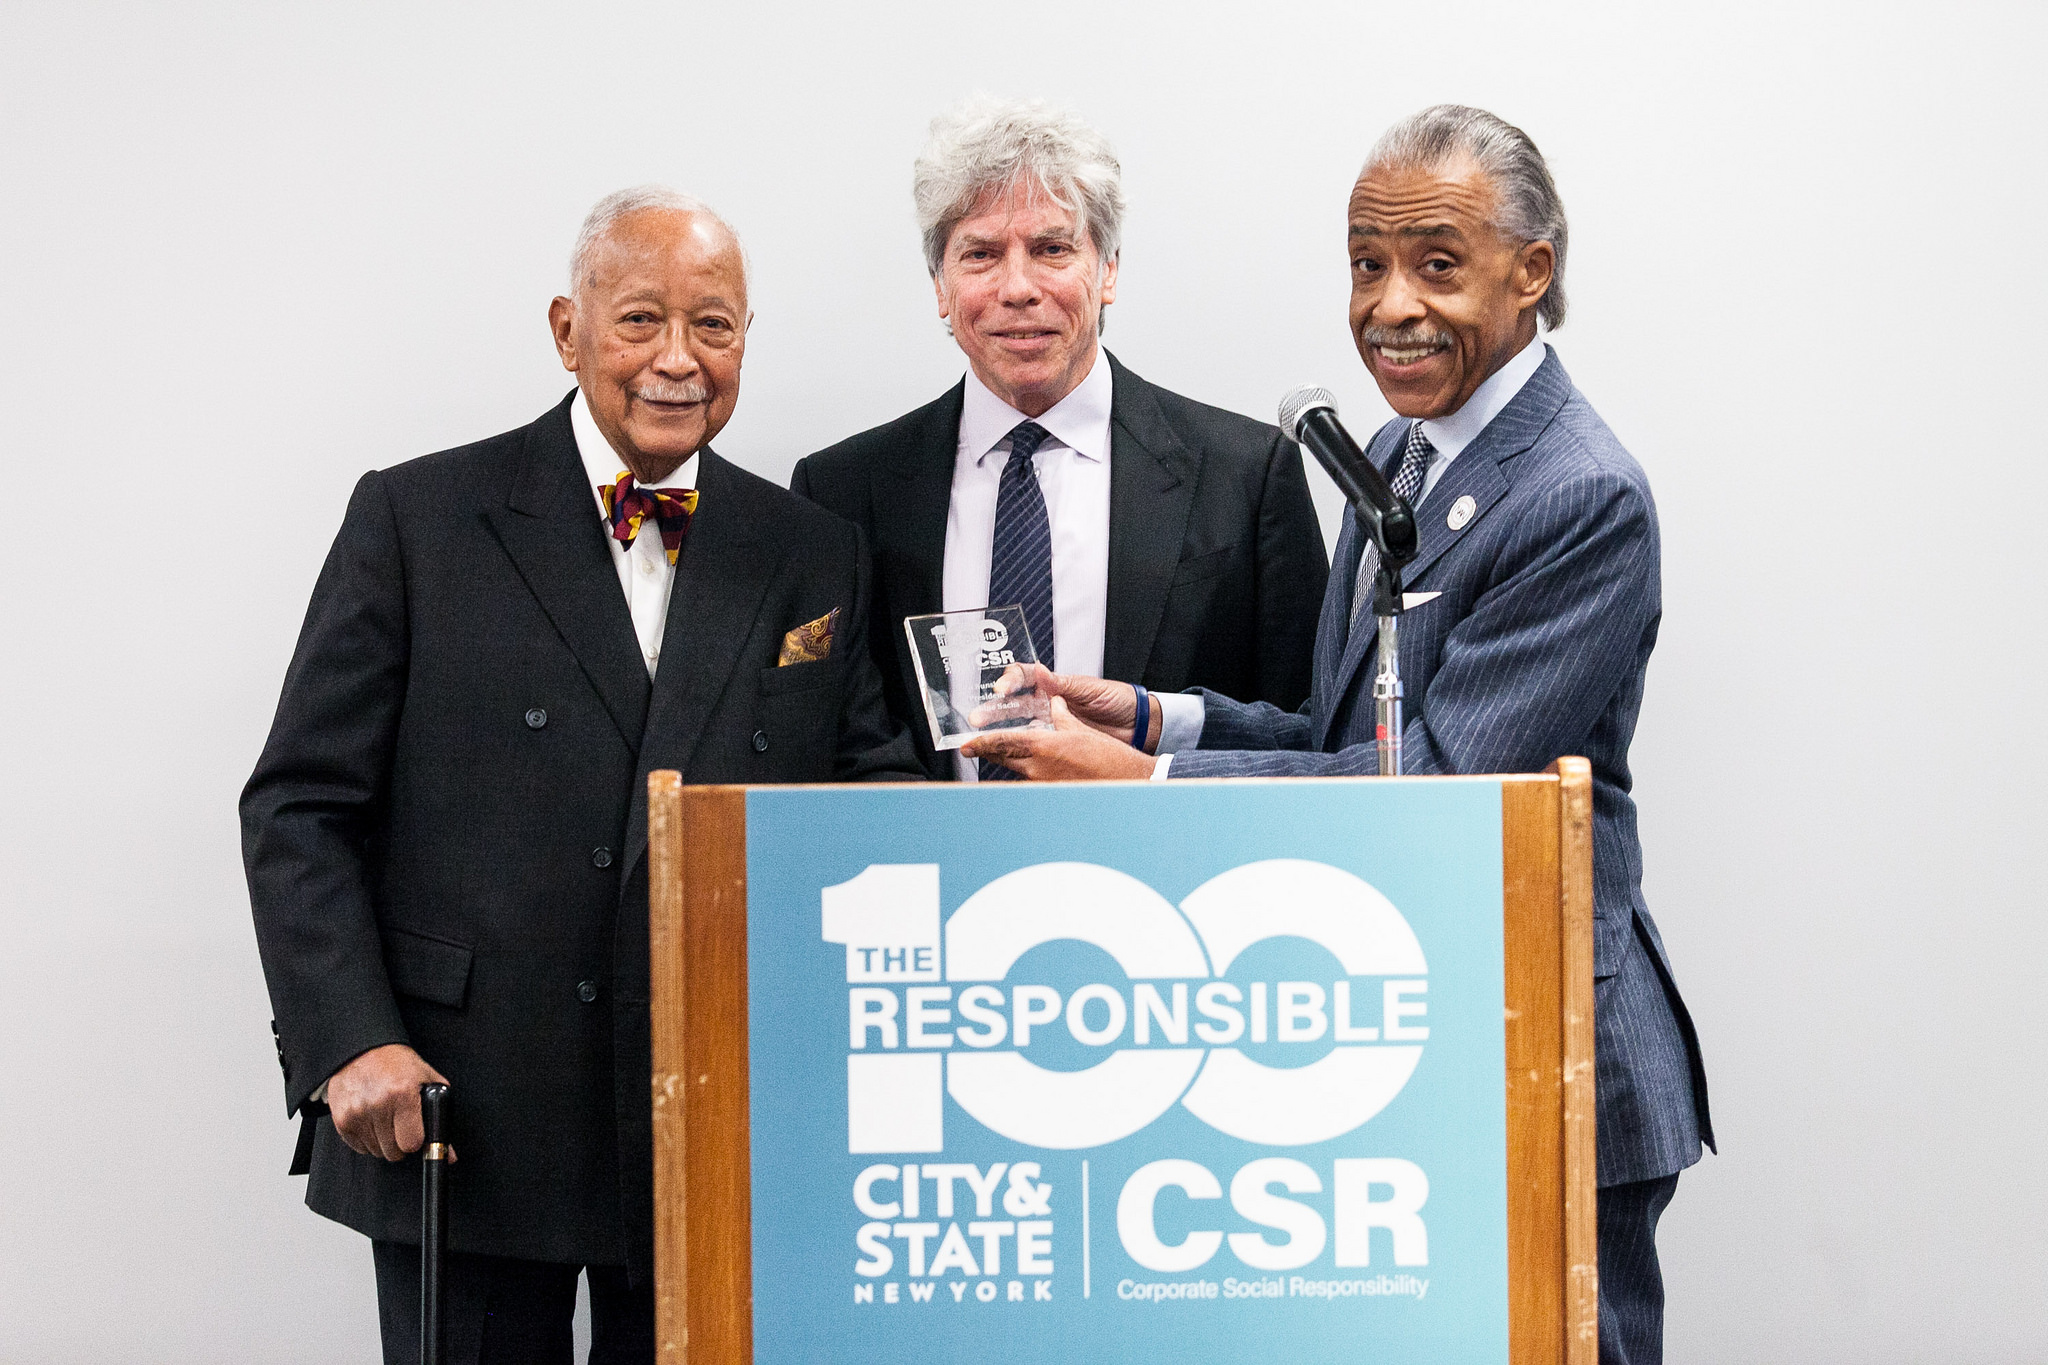 Former NYC Mayor David Dinkins, Ken Sunshine and Al Sharpton at City&State's Responsible 100 event for Corporate Social Responsibility